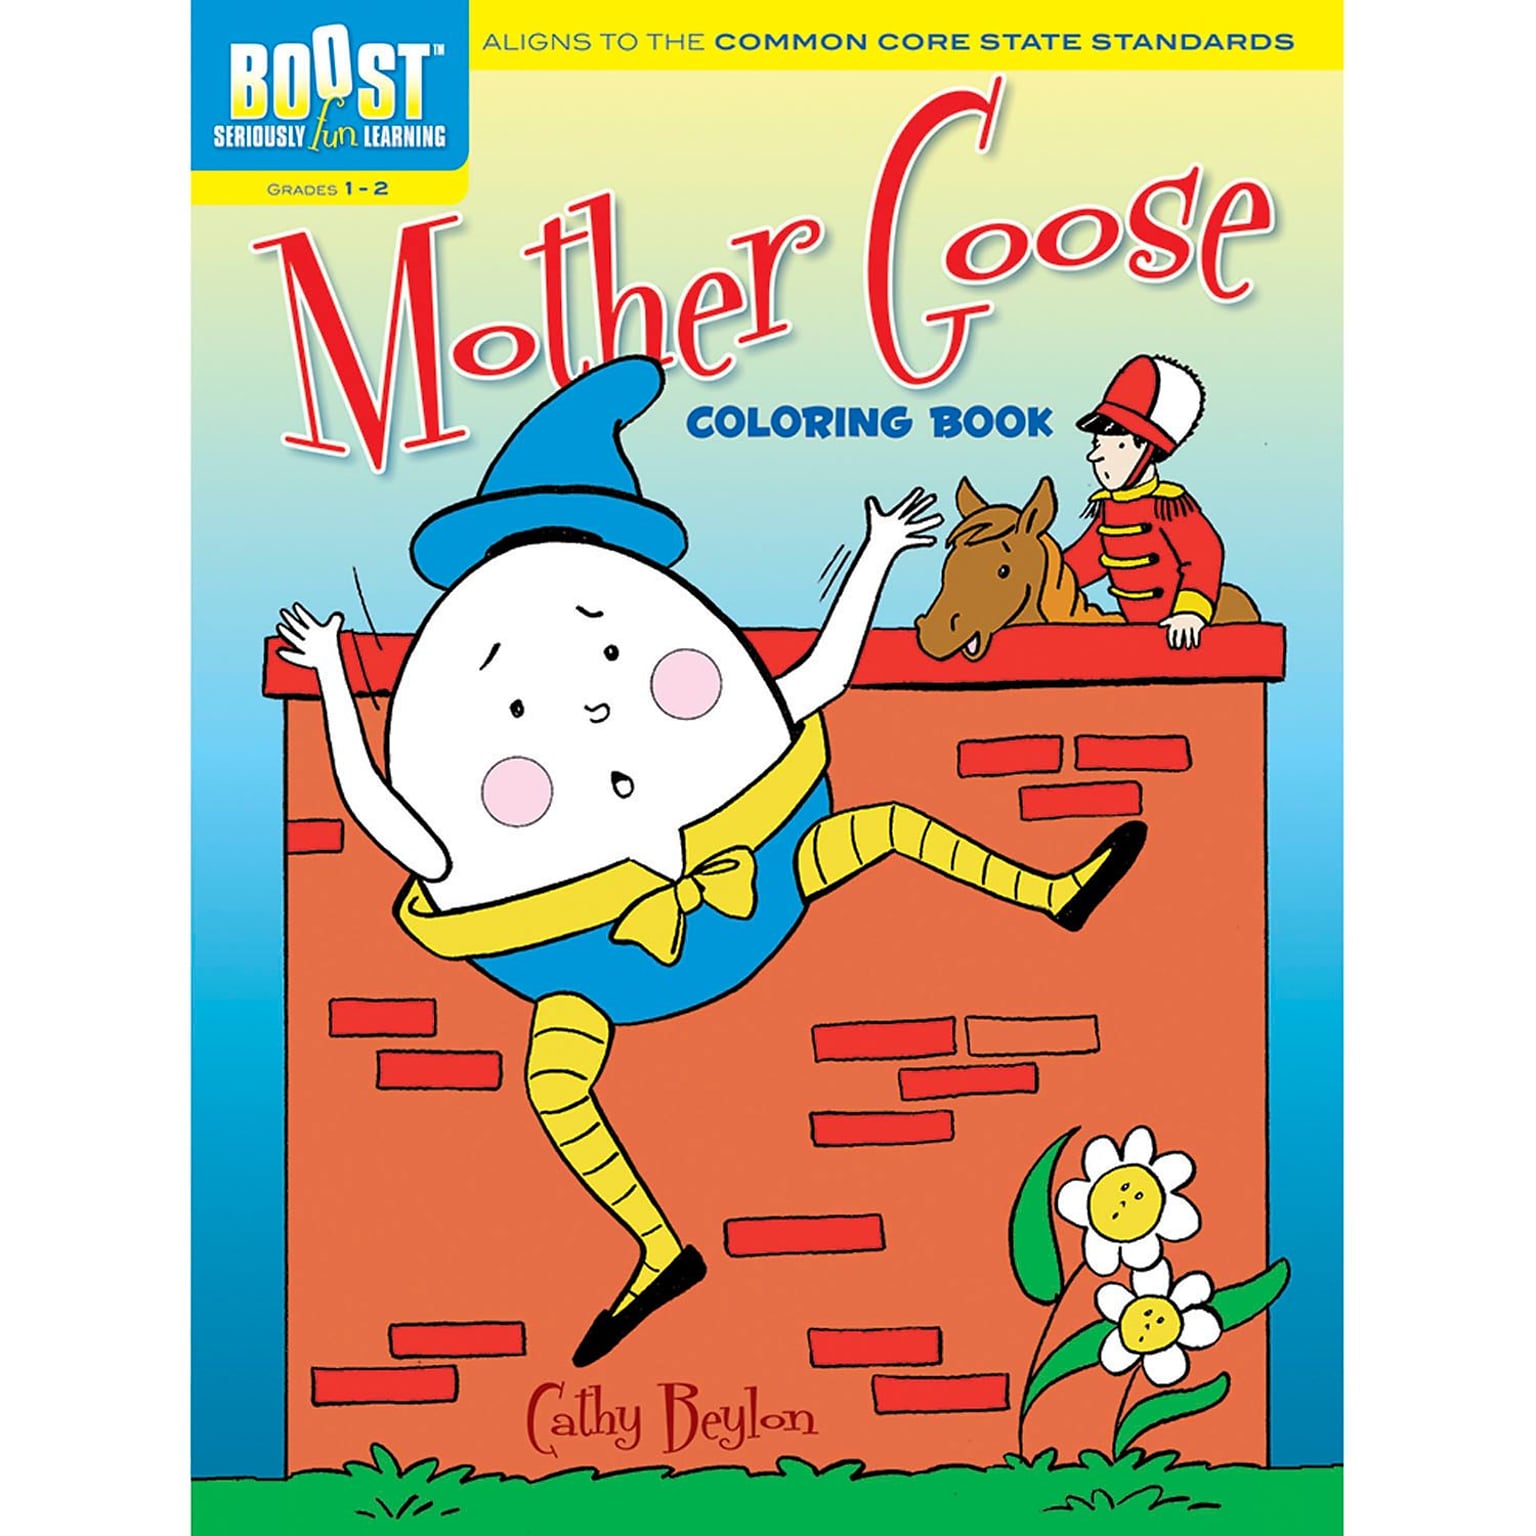 Dover® Boost™ Mother Goose Coloring Book